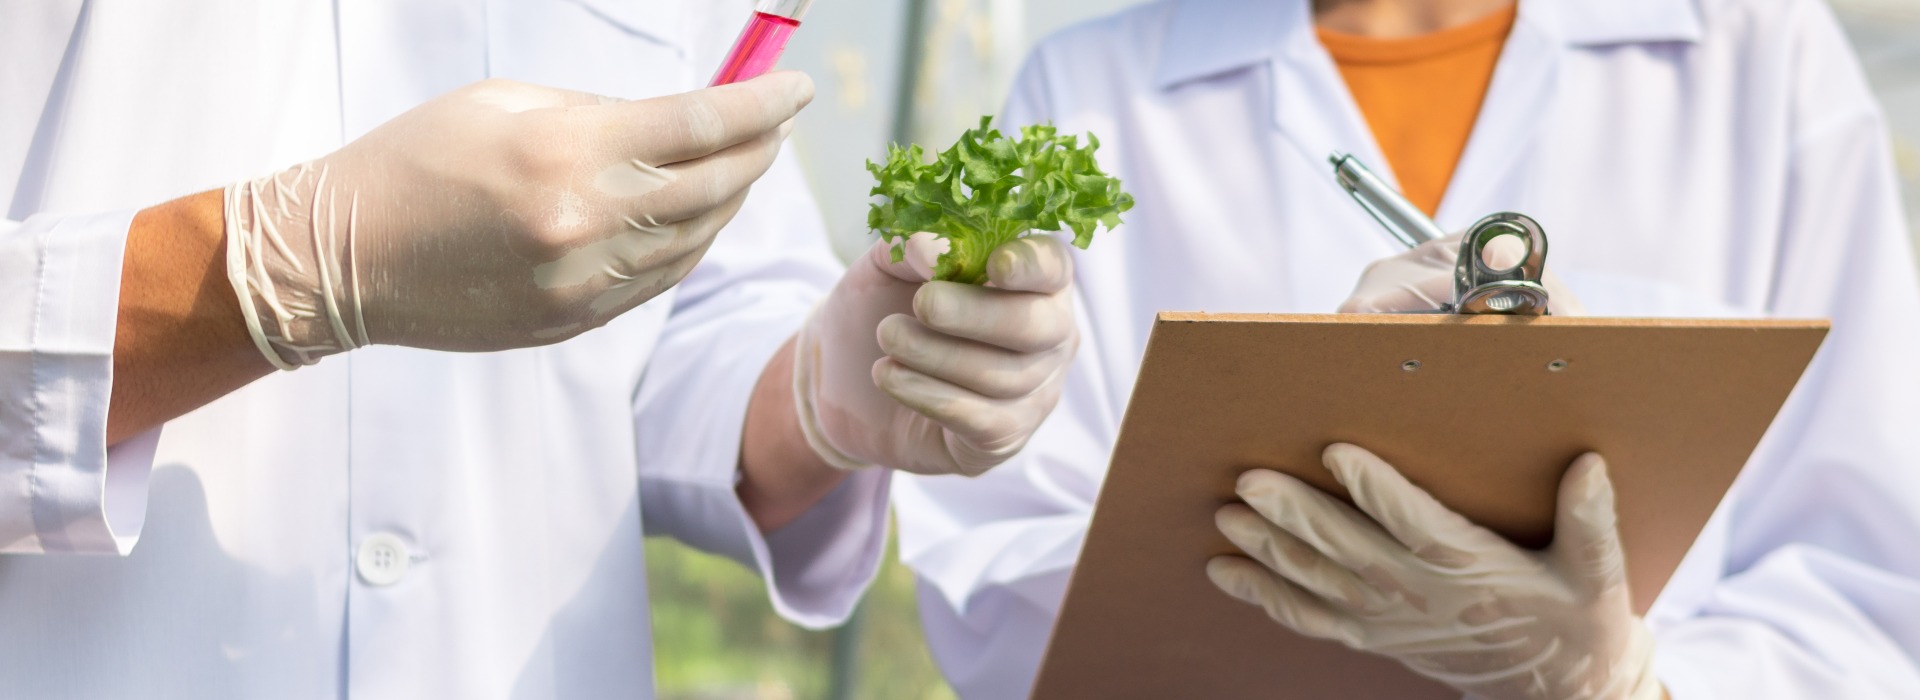 Group of scientist is taking note about experiment results of hydroponic vegetables.